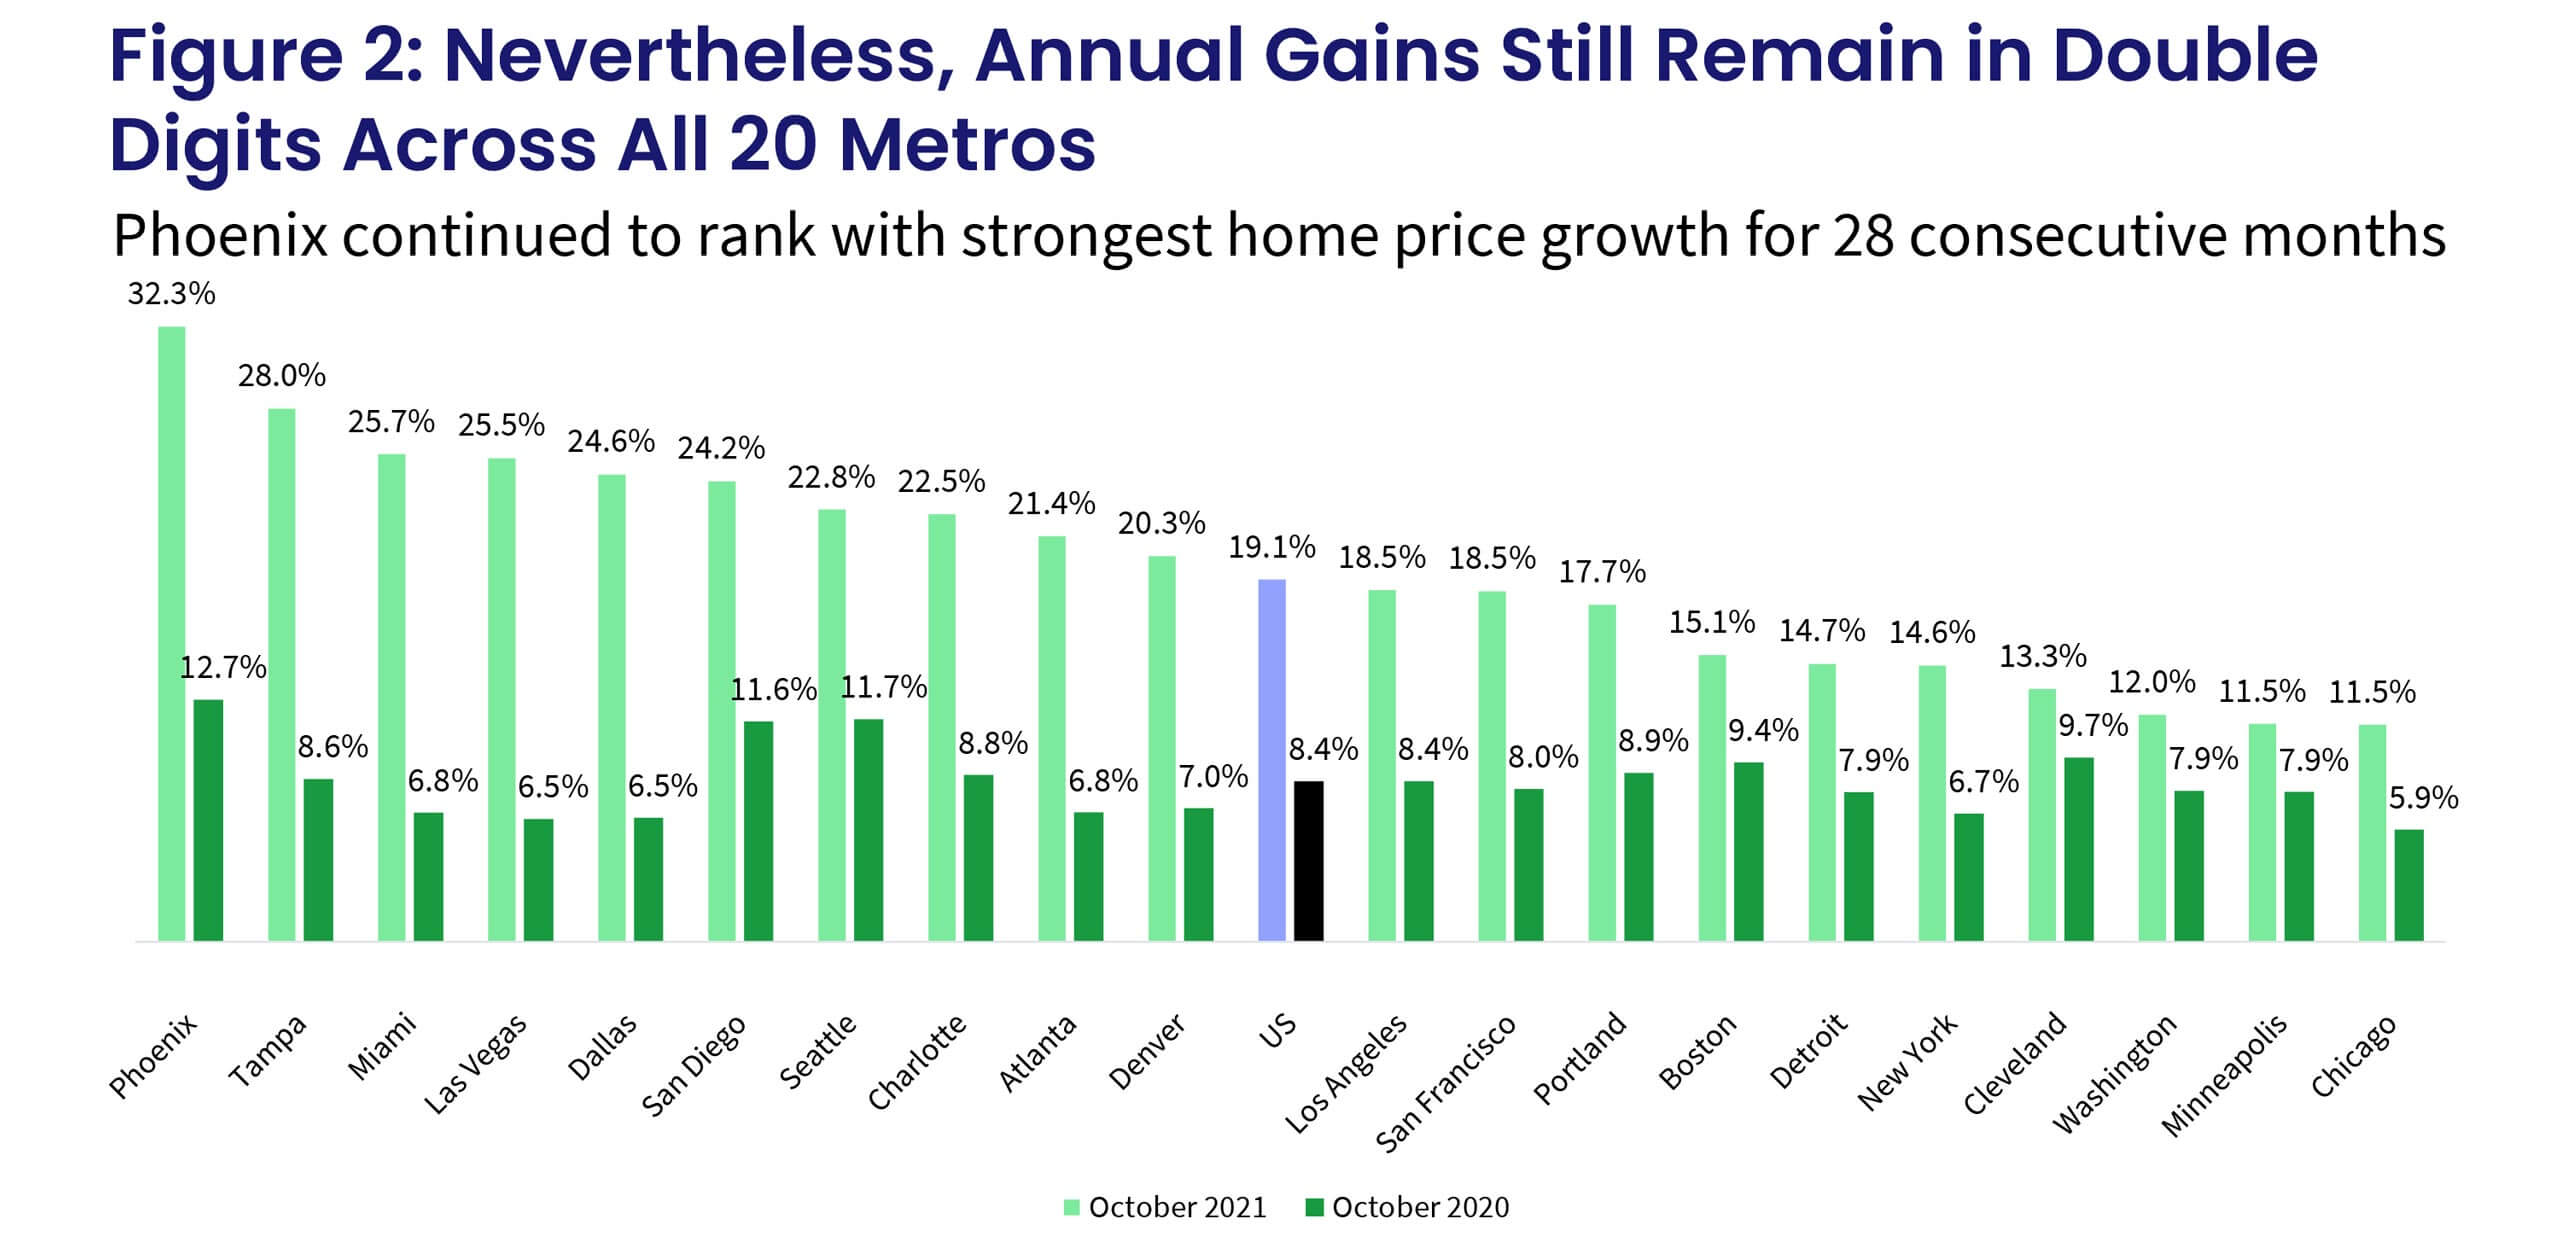 Figure 2: Nevertheless, Annual Gains Still Remain in Double Digits Across All 20 Metros 